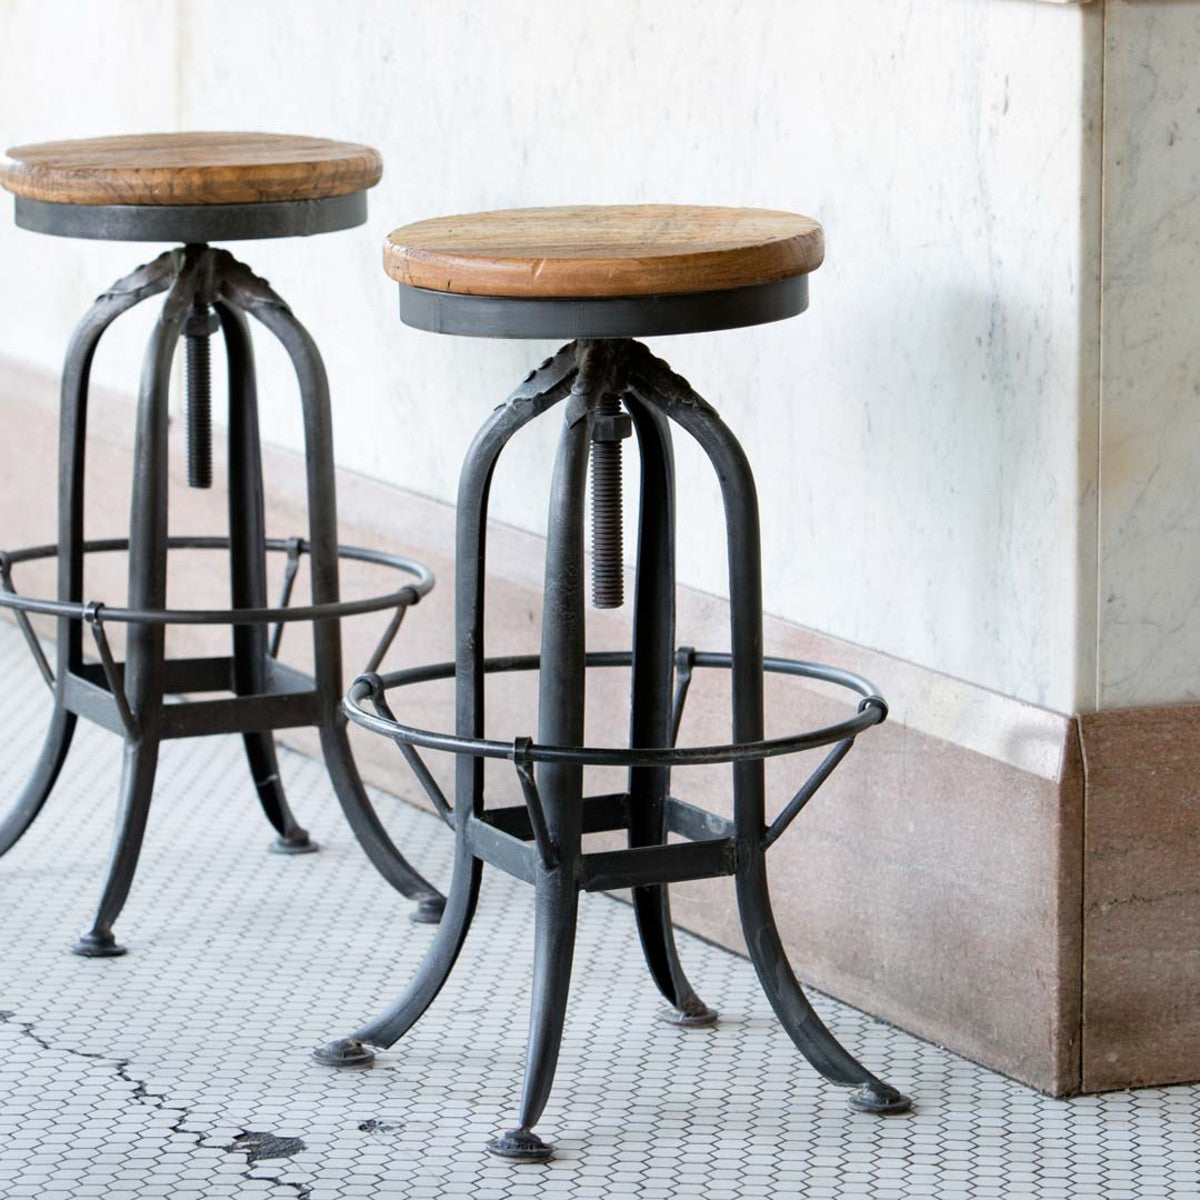 Adjustable Factory Stool-Iron Accents